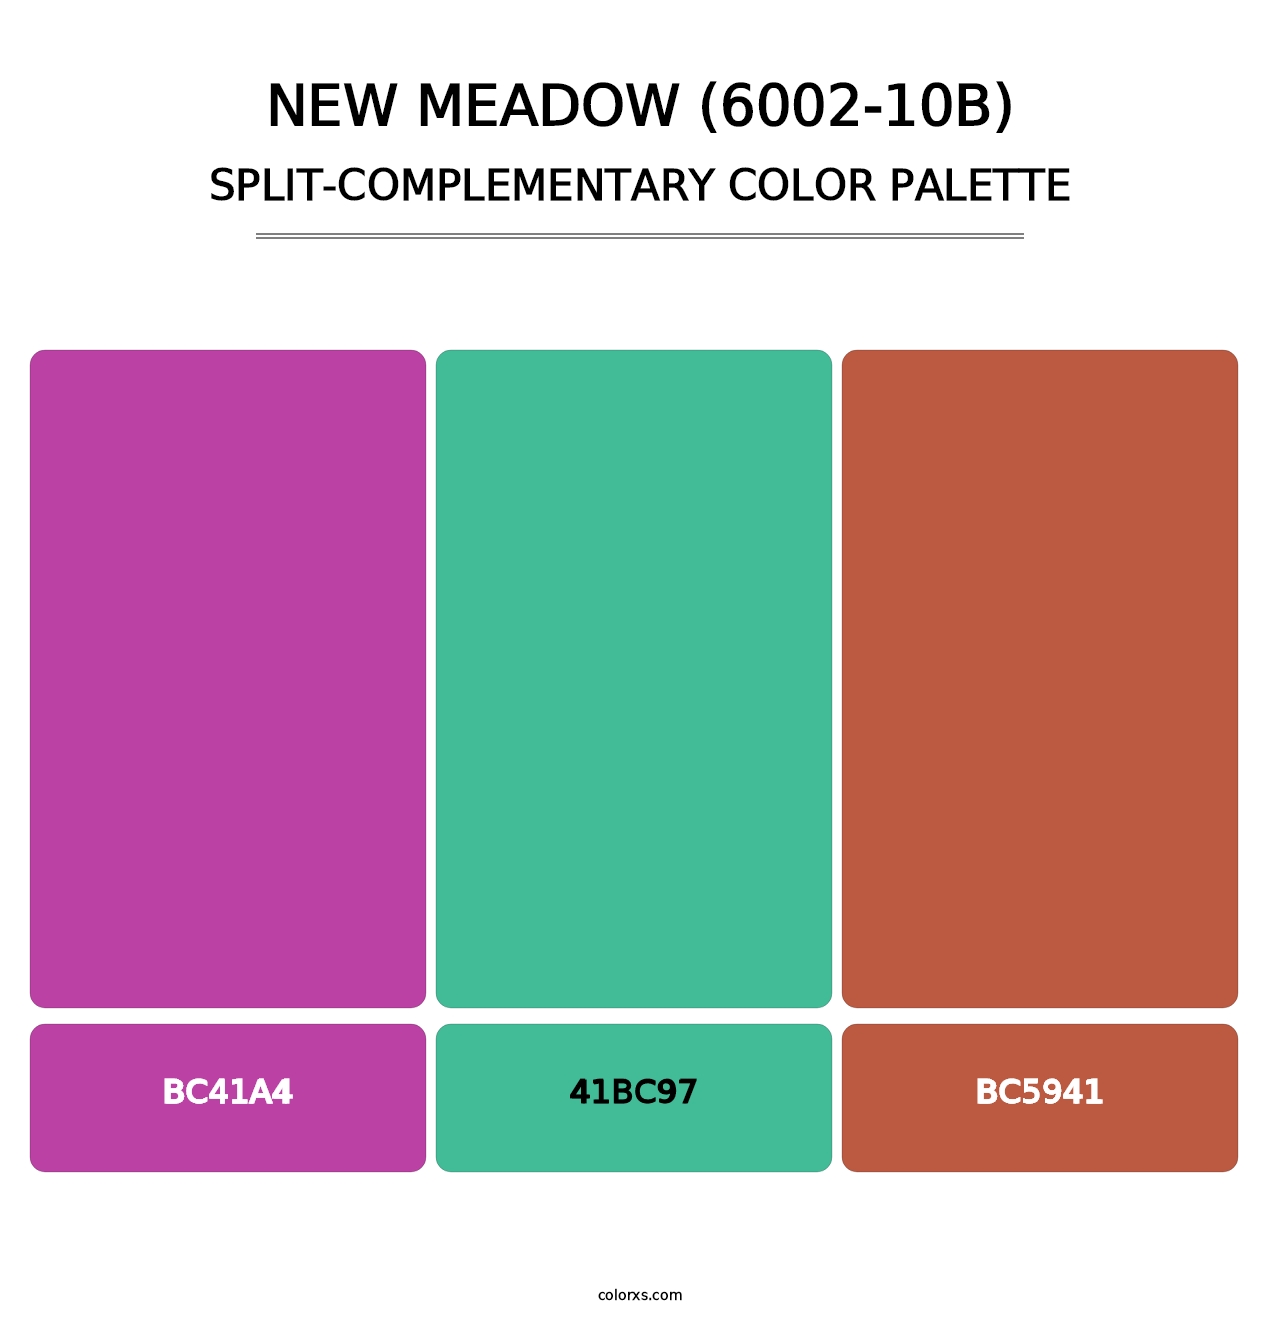 New Meadow (6002-10B) - Split-Complementary Color Palette